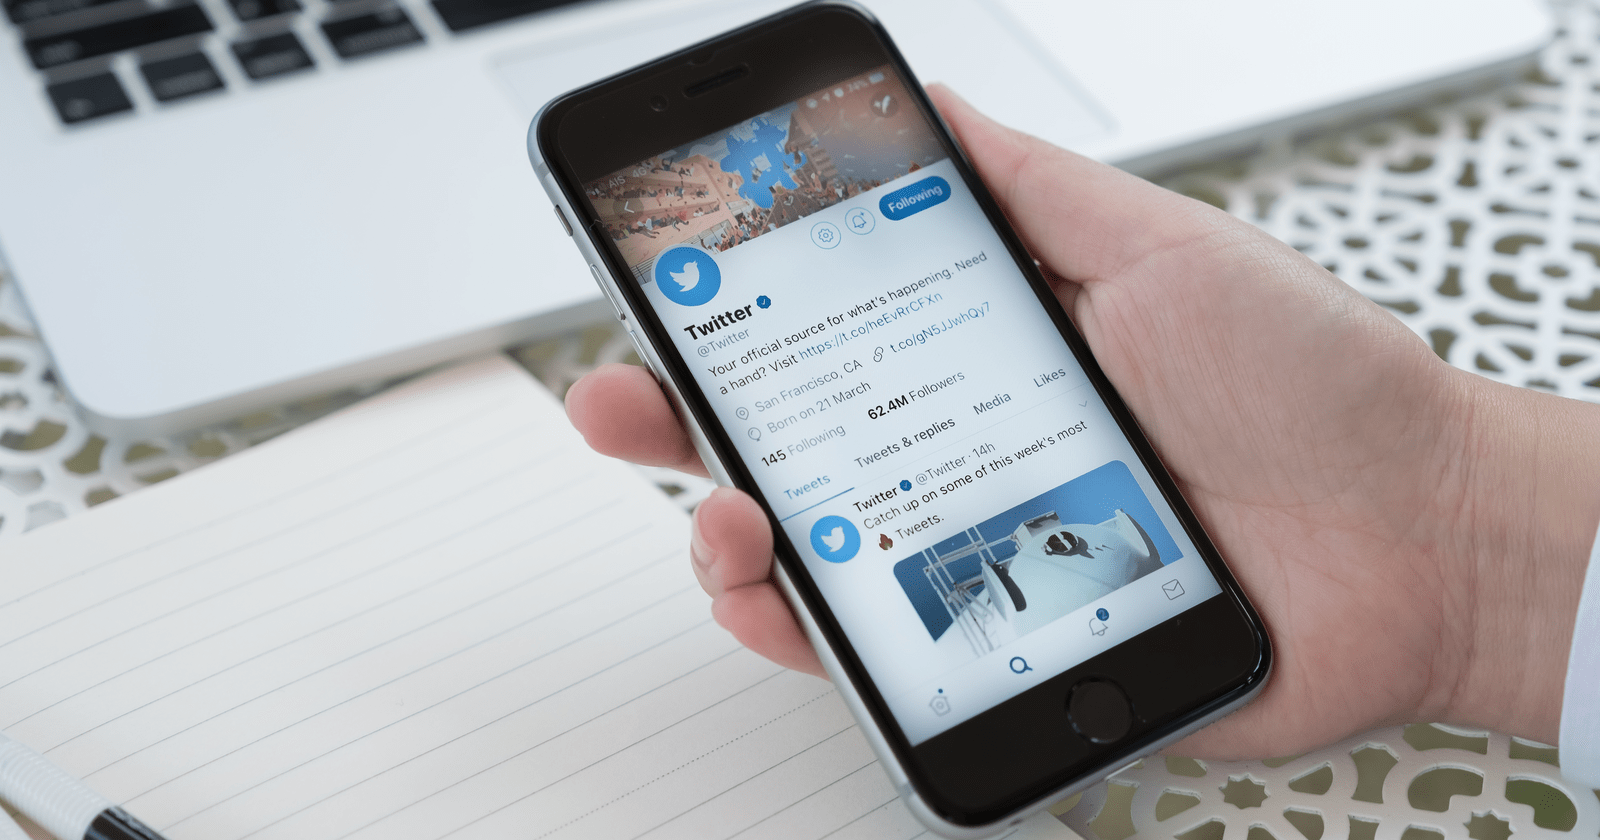 Twitter Reveals How it Ranks Tweets in Search Results - Search Engine Journal